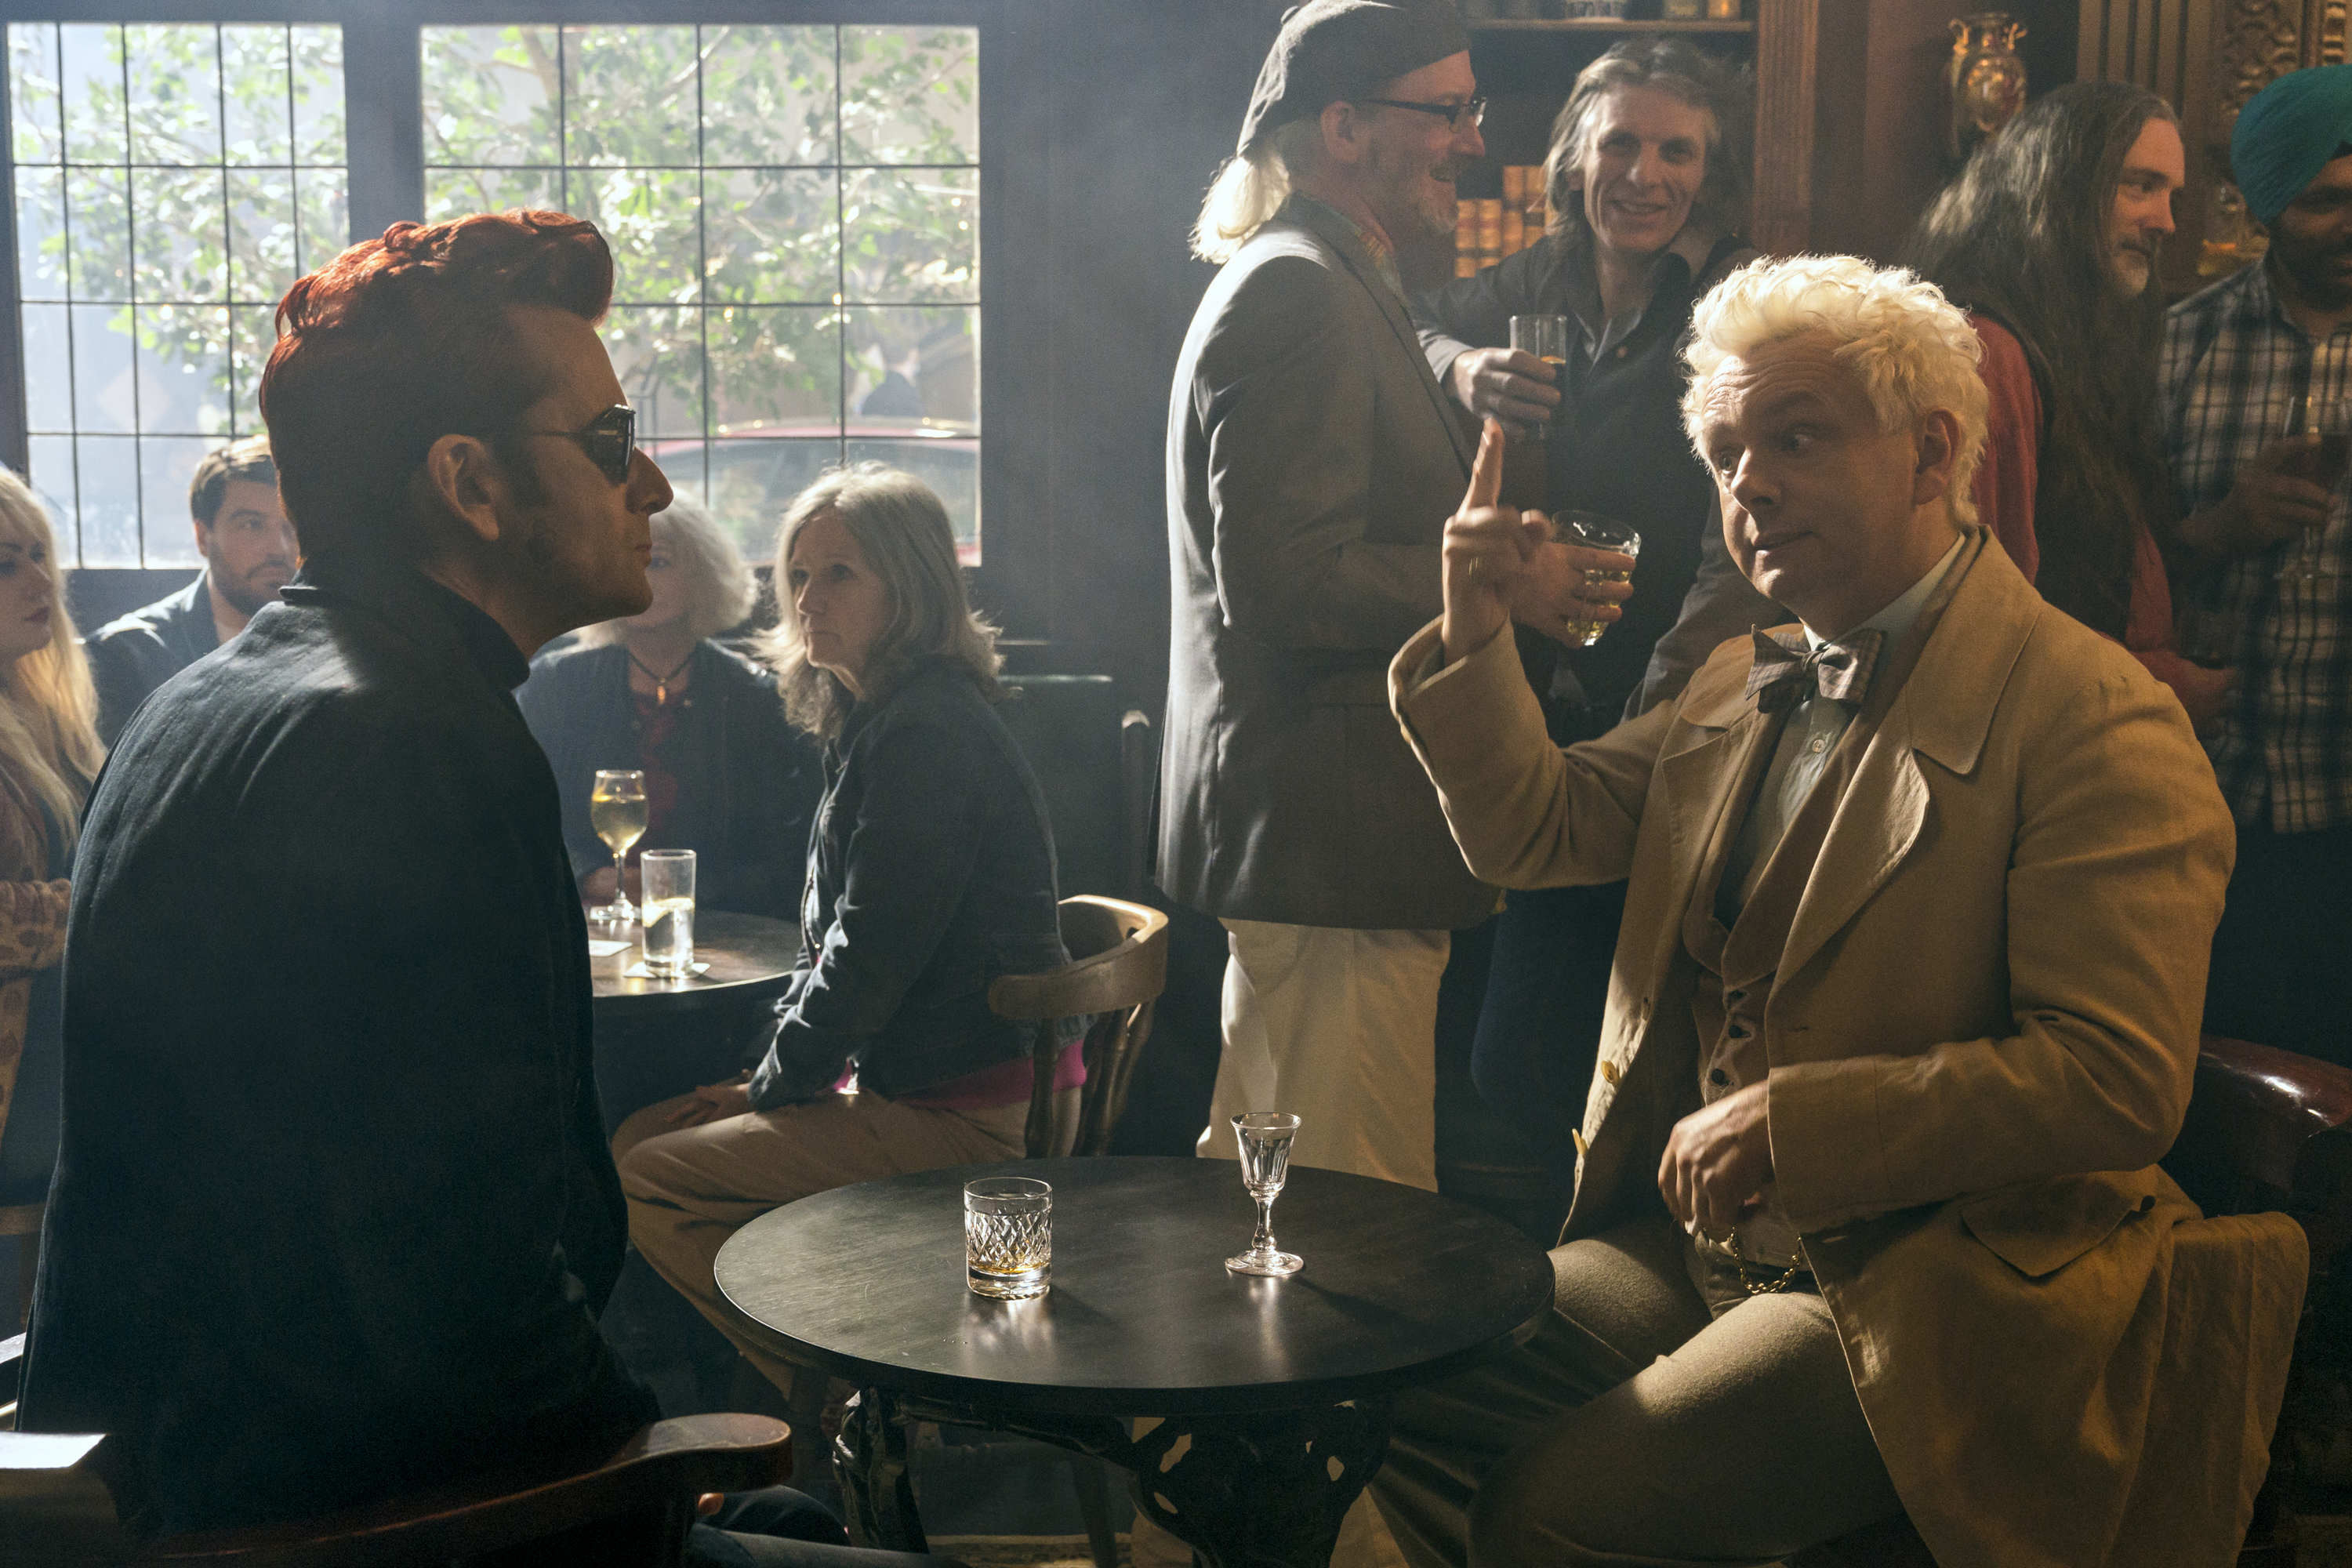 Crowley (David Tennant) sits and looks confused at Aziraphale (Michael Sheen) who is raising his glass to him across the table